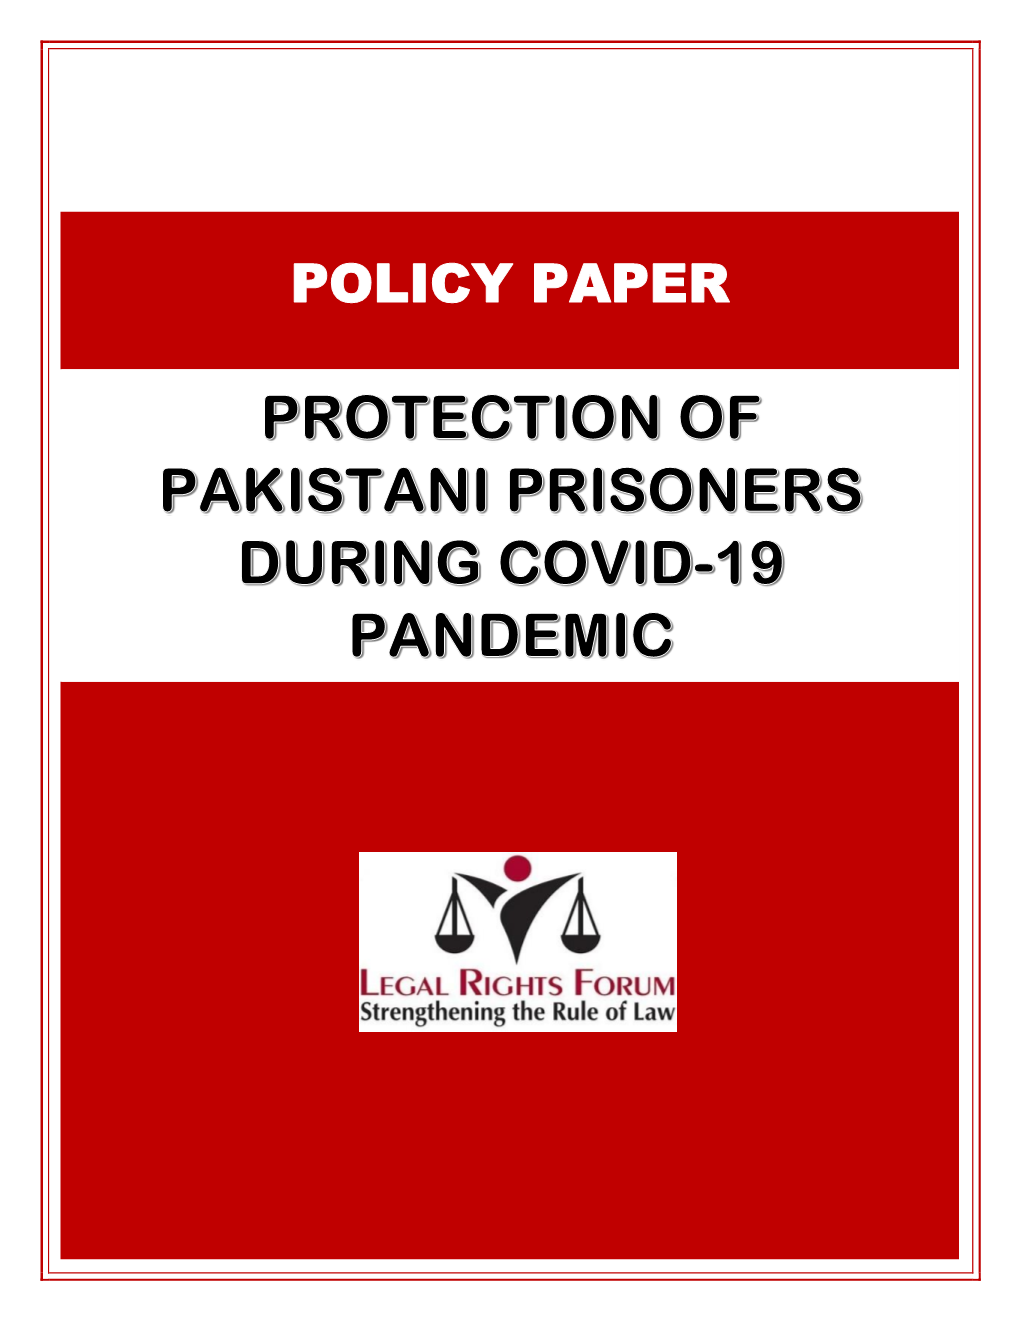 Protection of Pakistani Prisoners During COVID-19 Pandemic